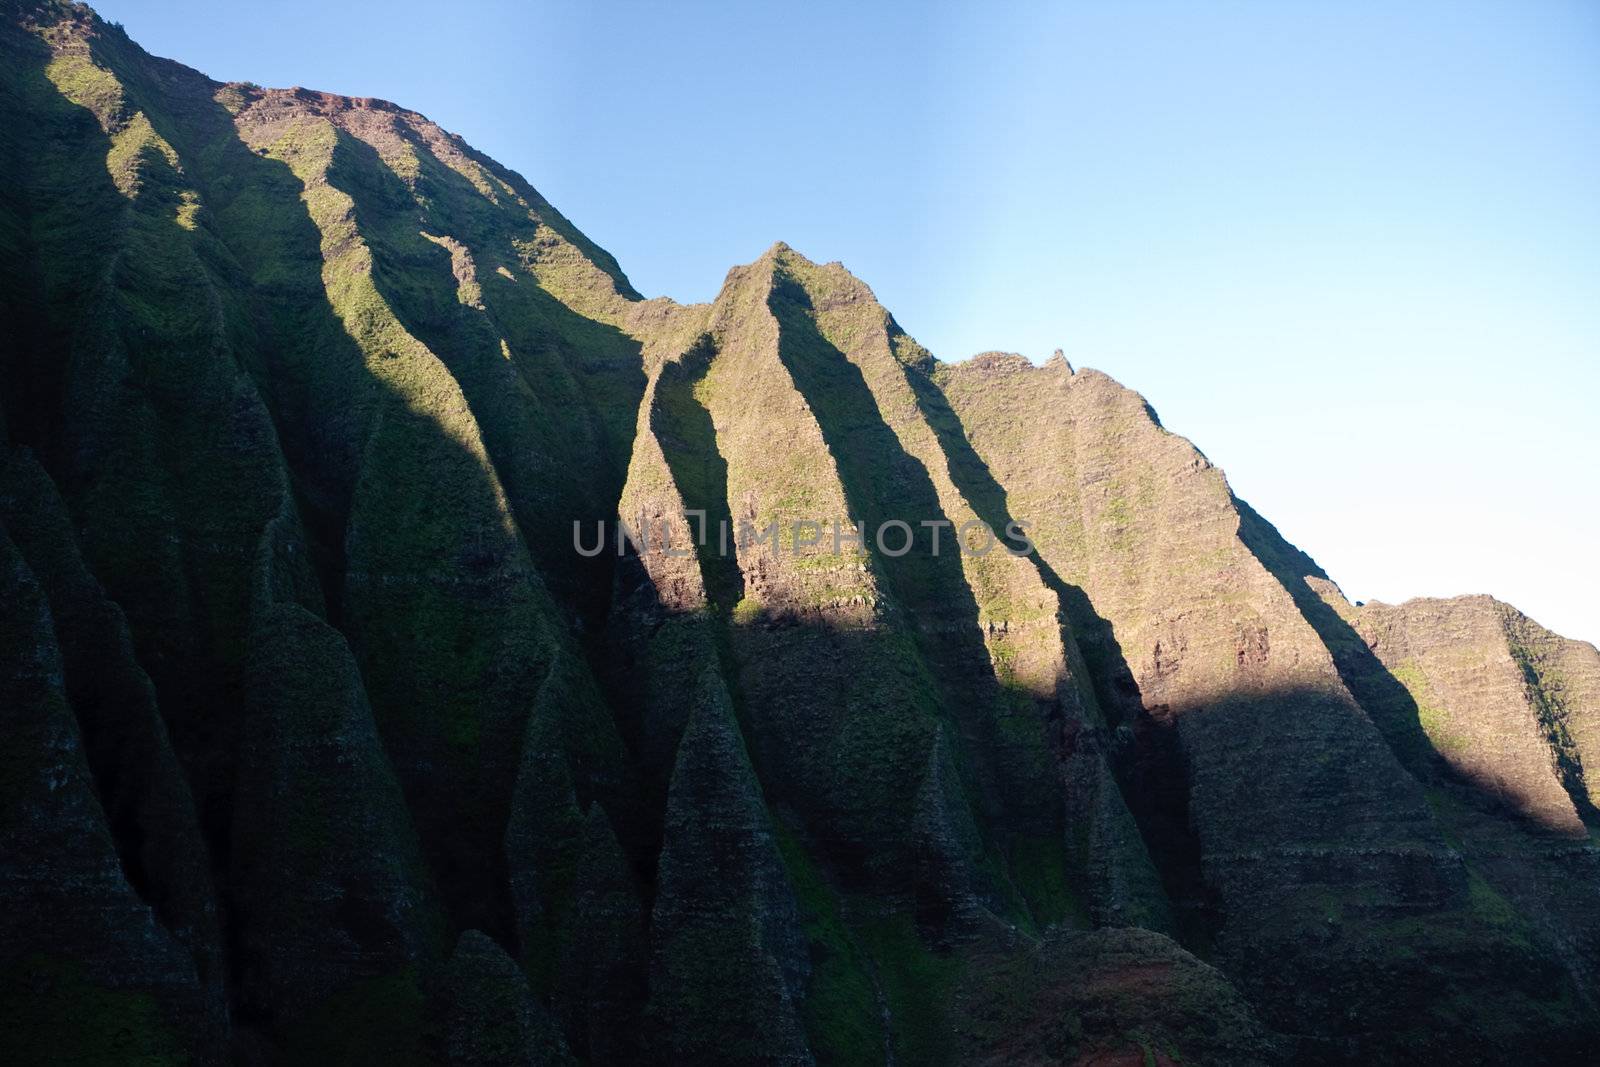 Wrinkled cliff face on Na Pali coast in Kauai by steheap